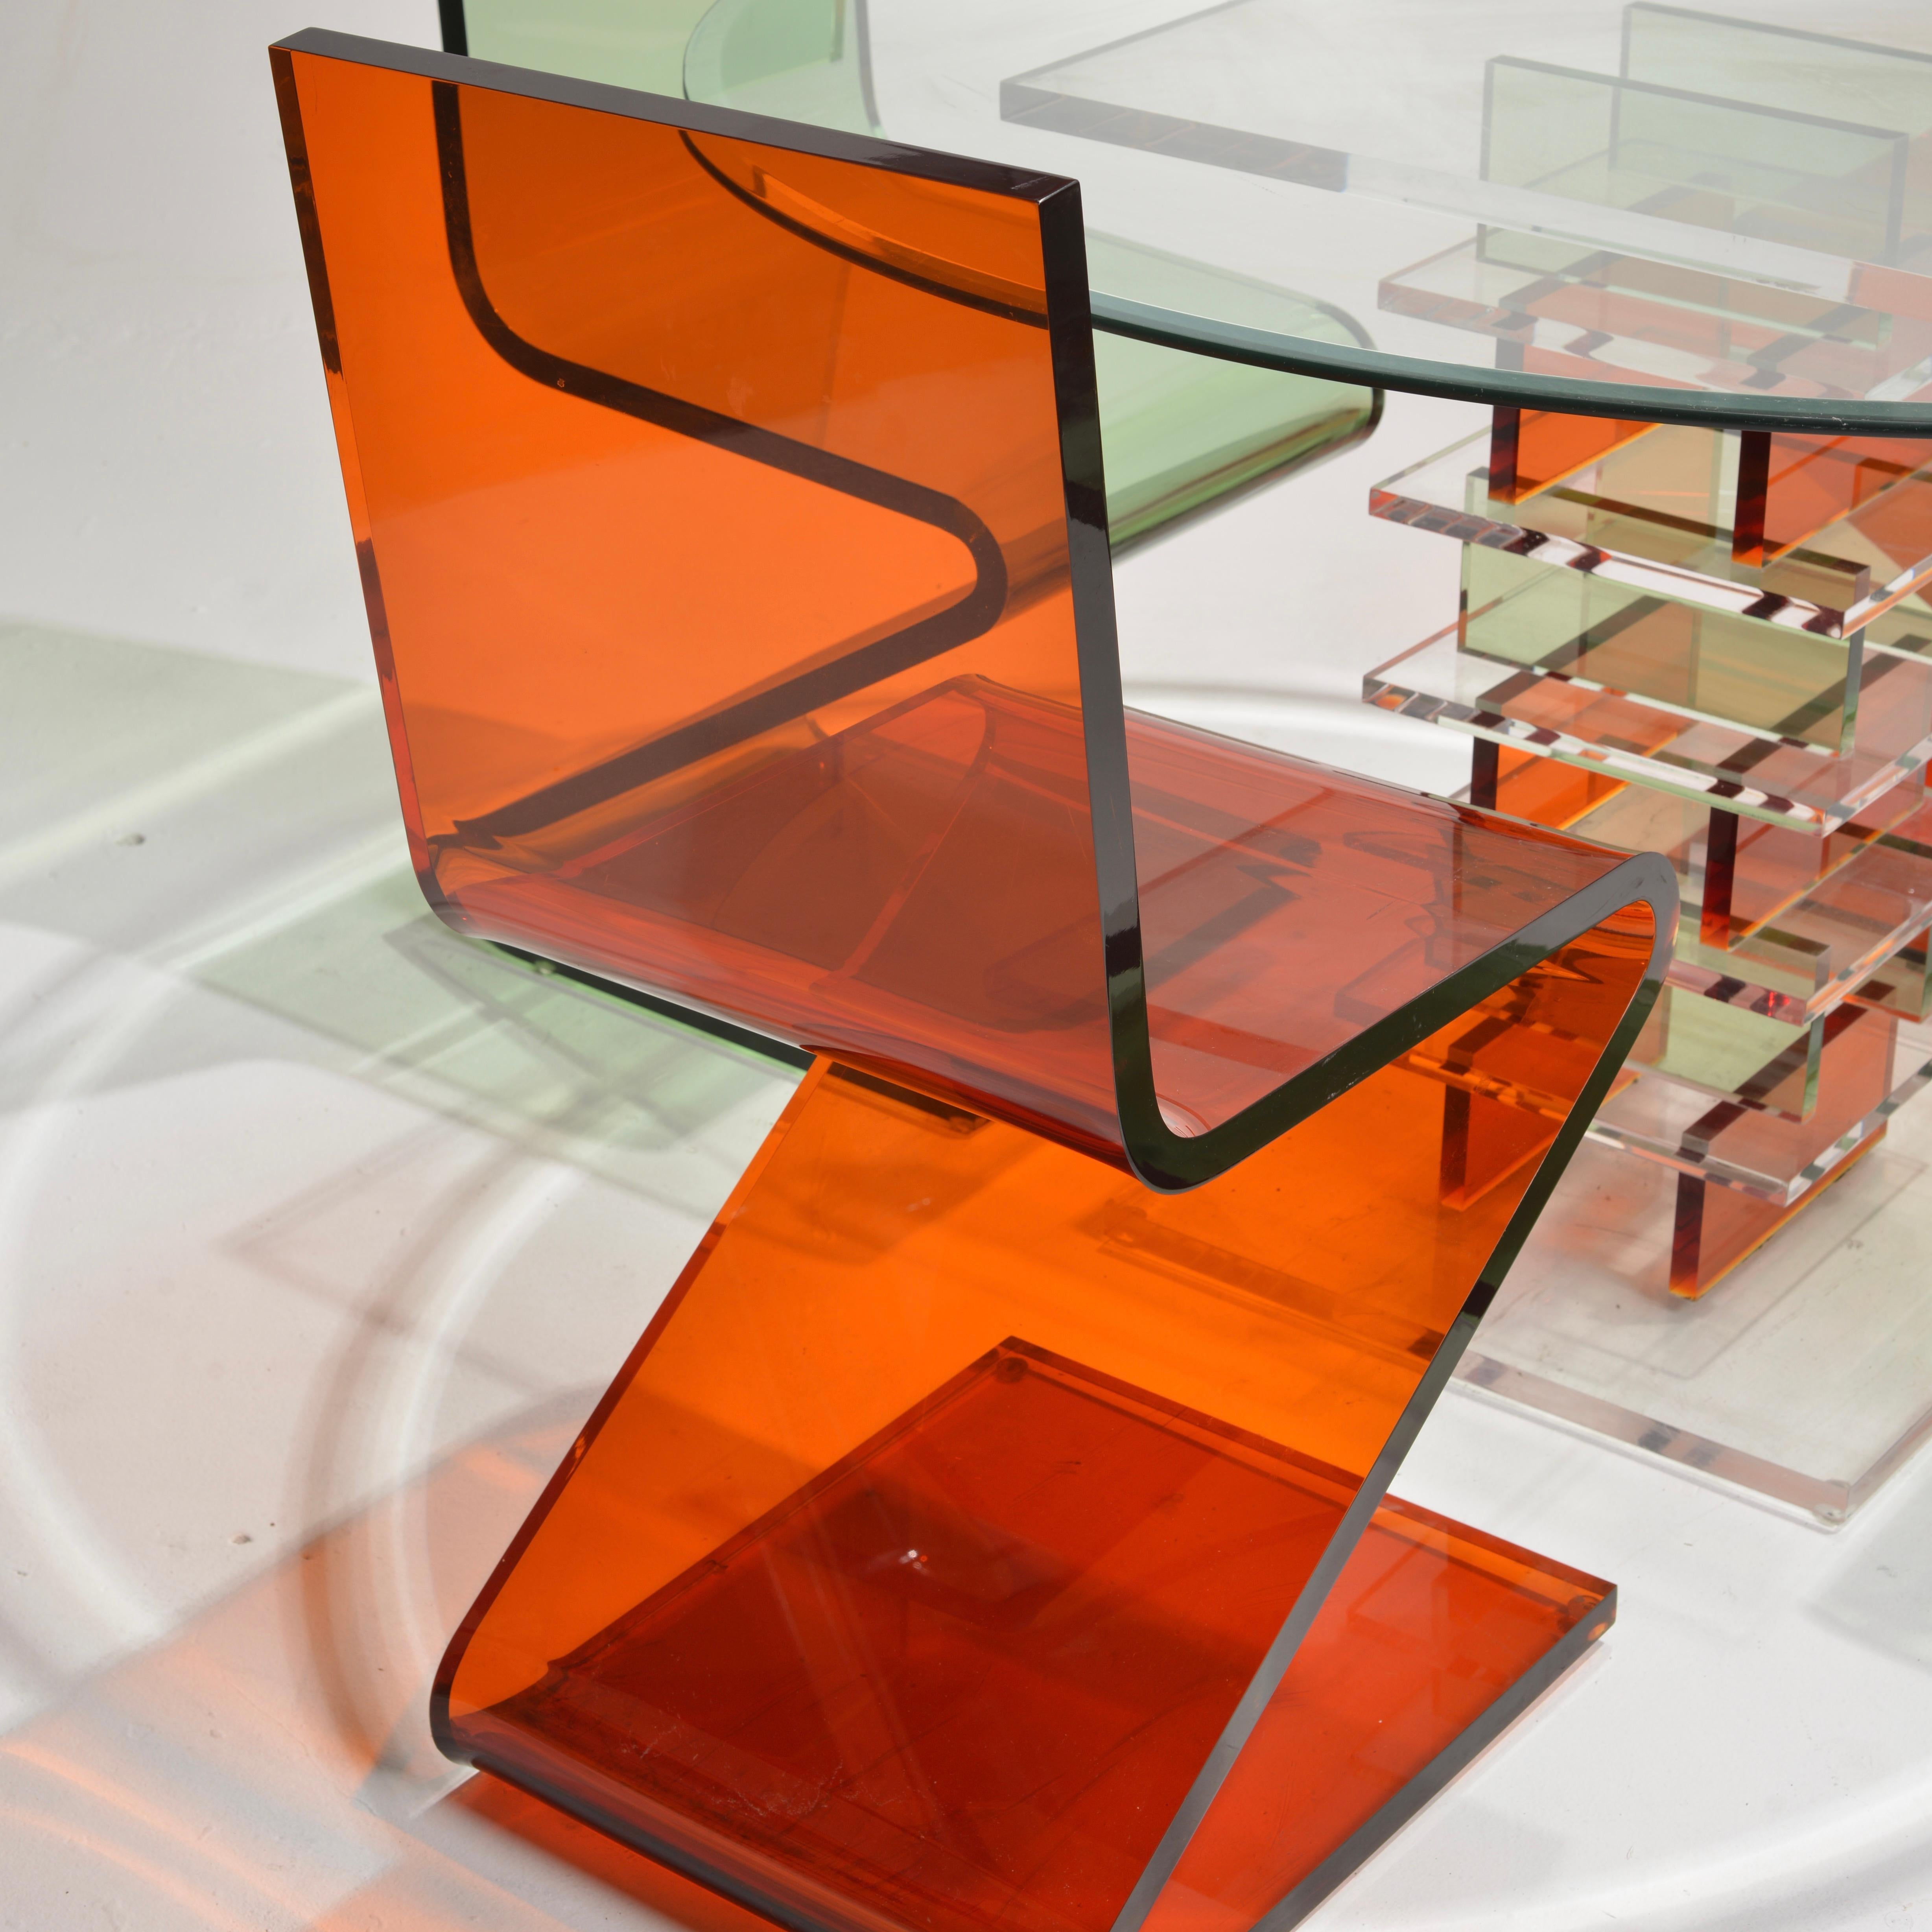 Vintage Lucite Z Table and Z Chairs by Shlomi Haziza for H Studio For Sale 5